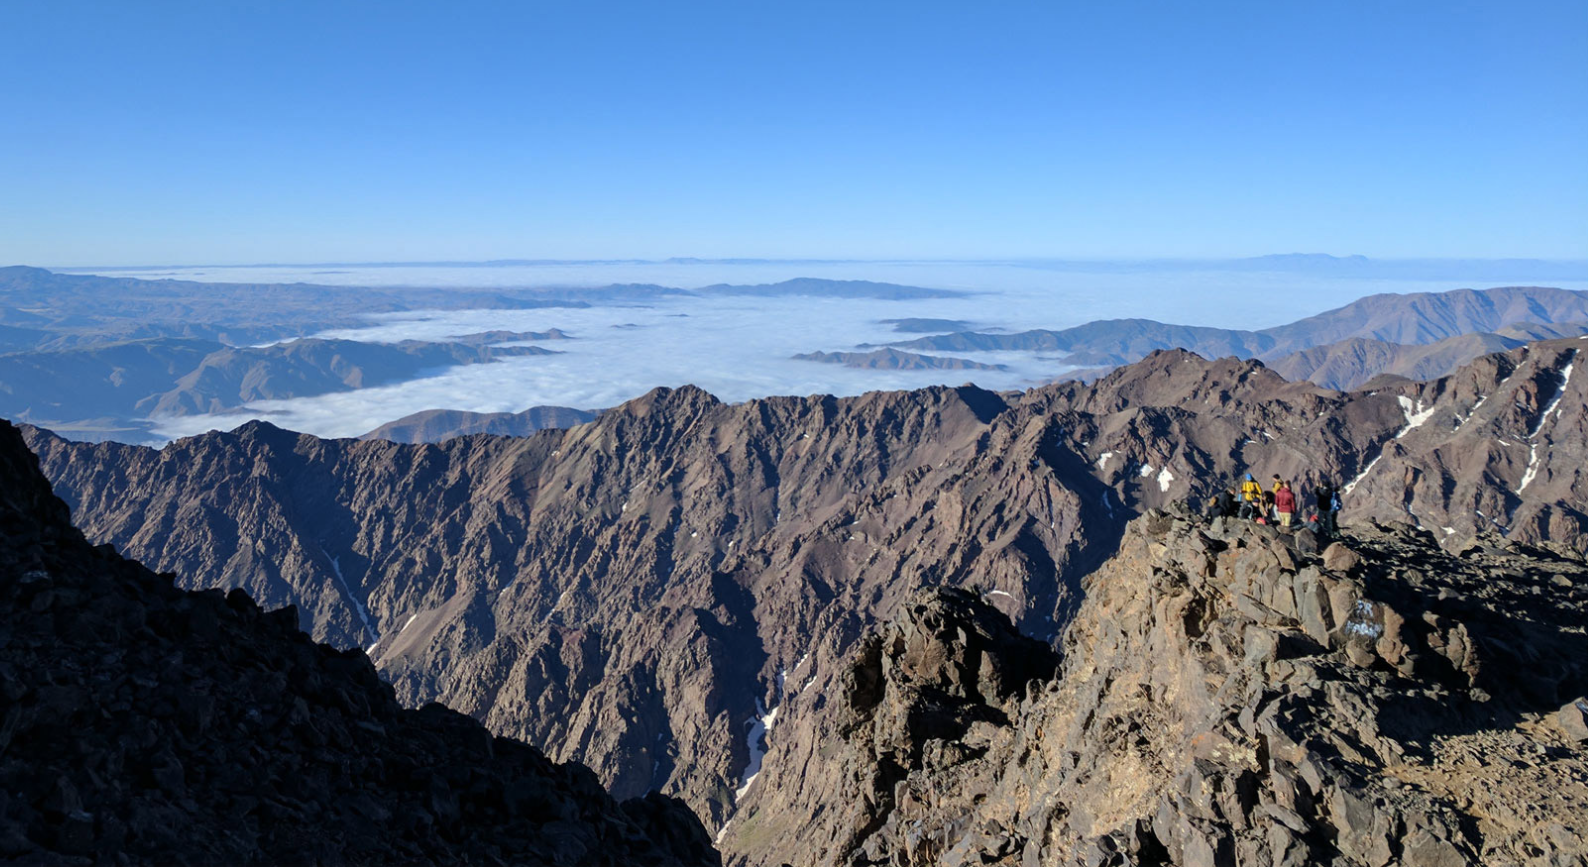 A skyline view from the summit of Mount Toubkal. Photo: Jack Clayton